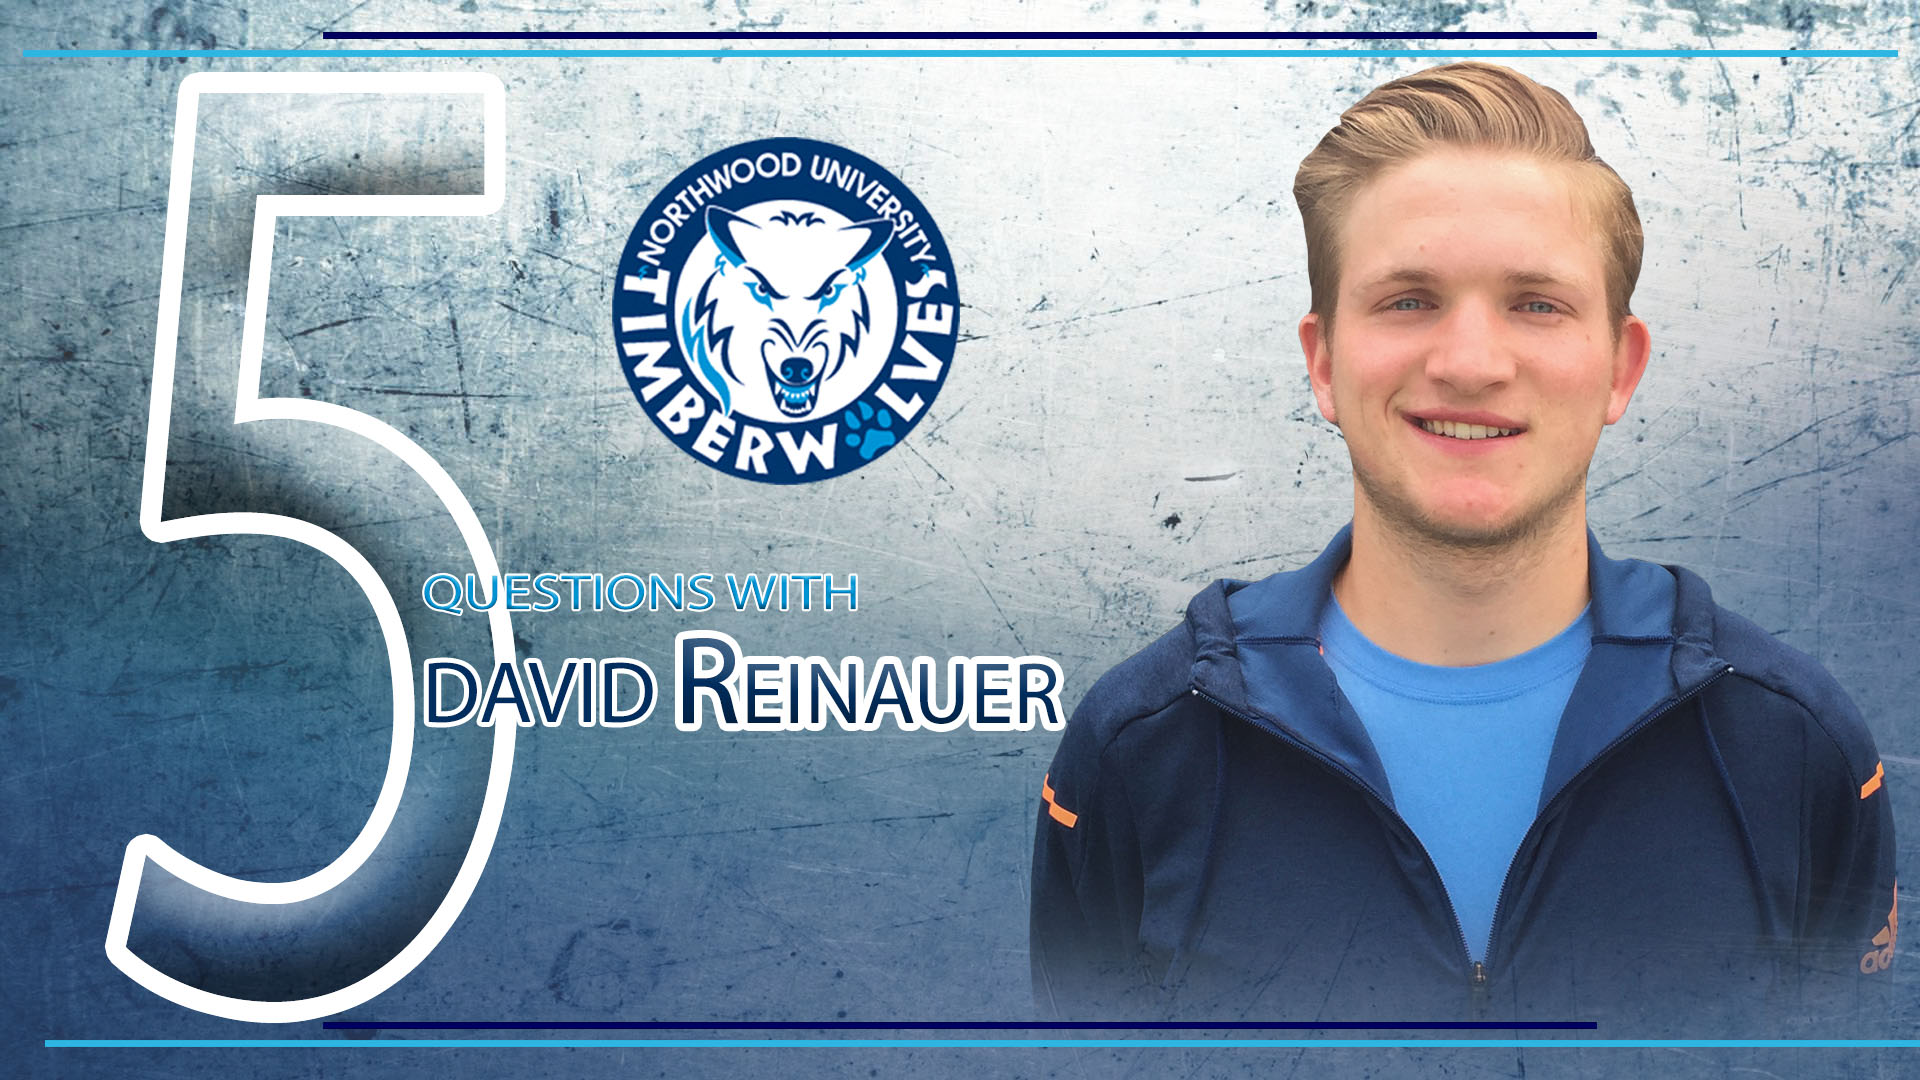 Northwood Athletics - 5 Questions with David Reinauer